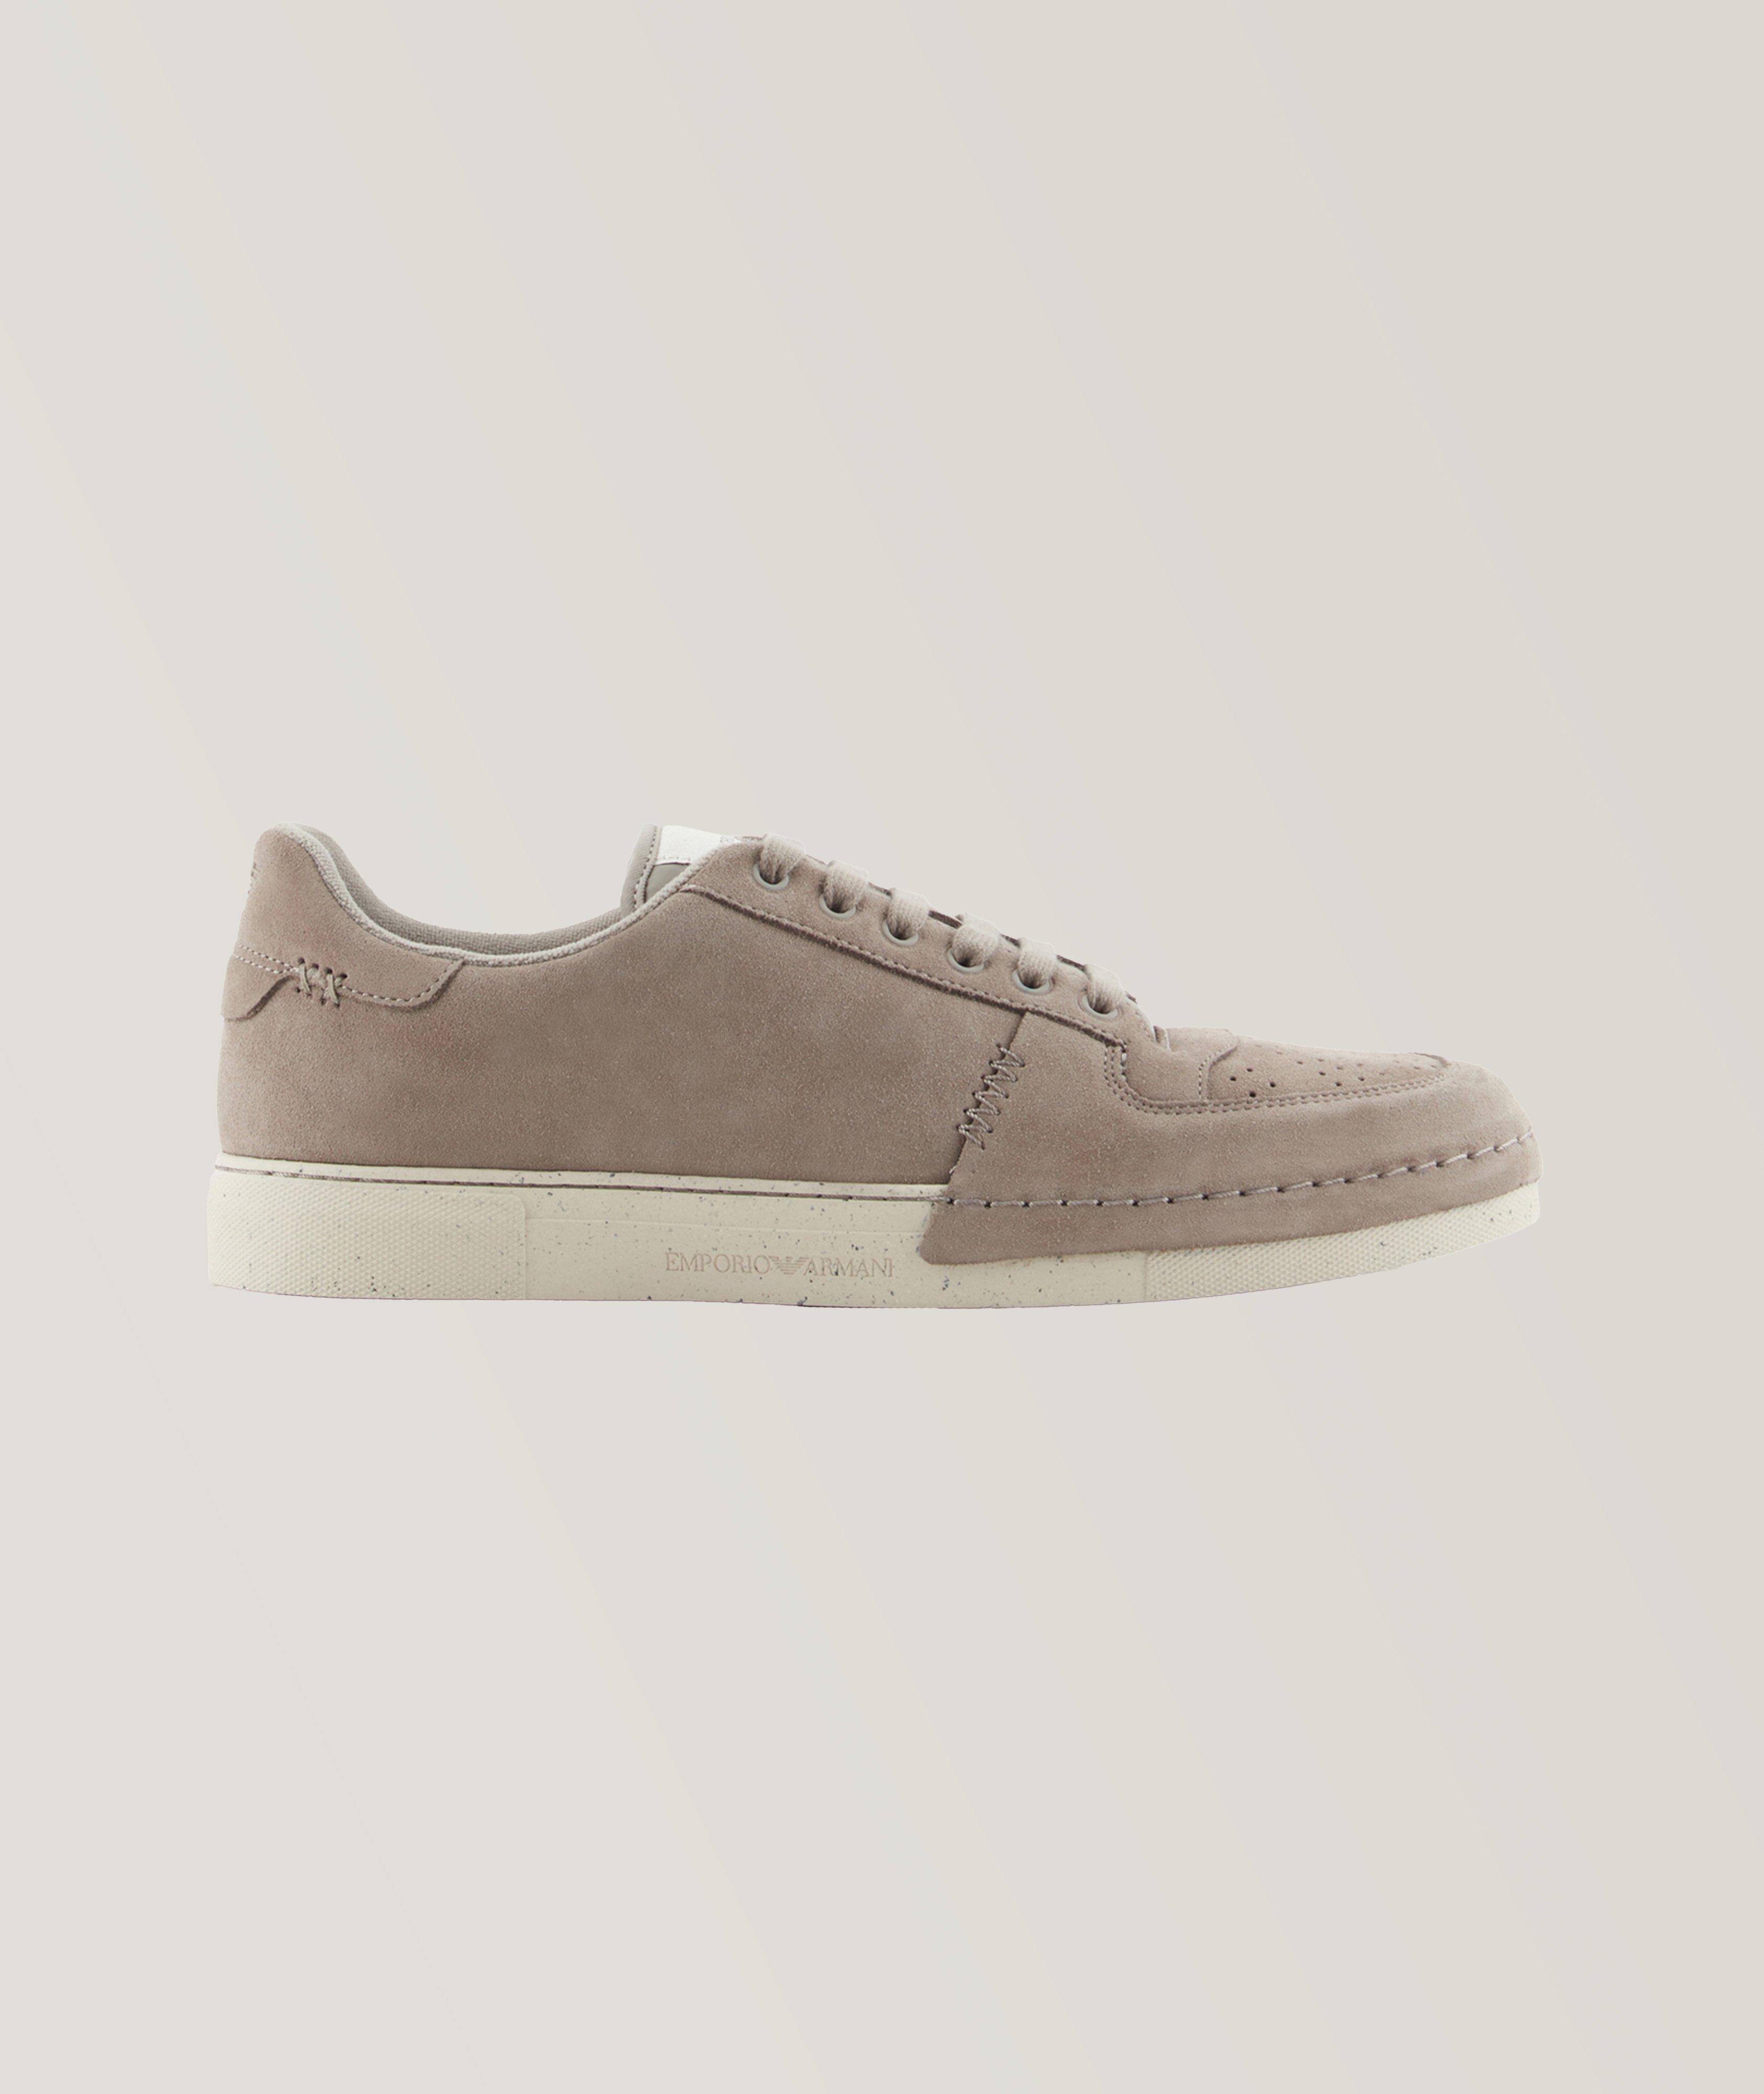 Suede Micro Perforated Sneakers image 0